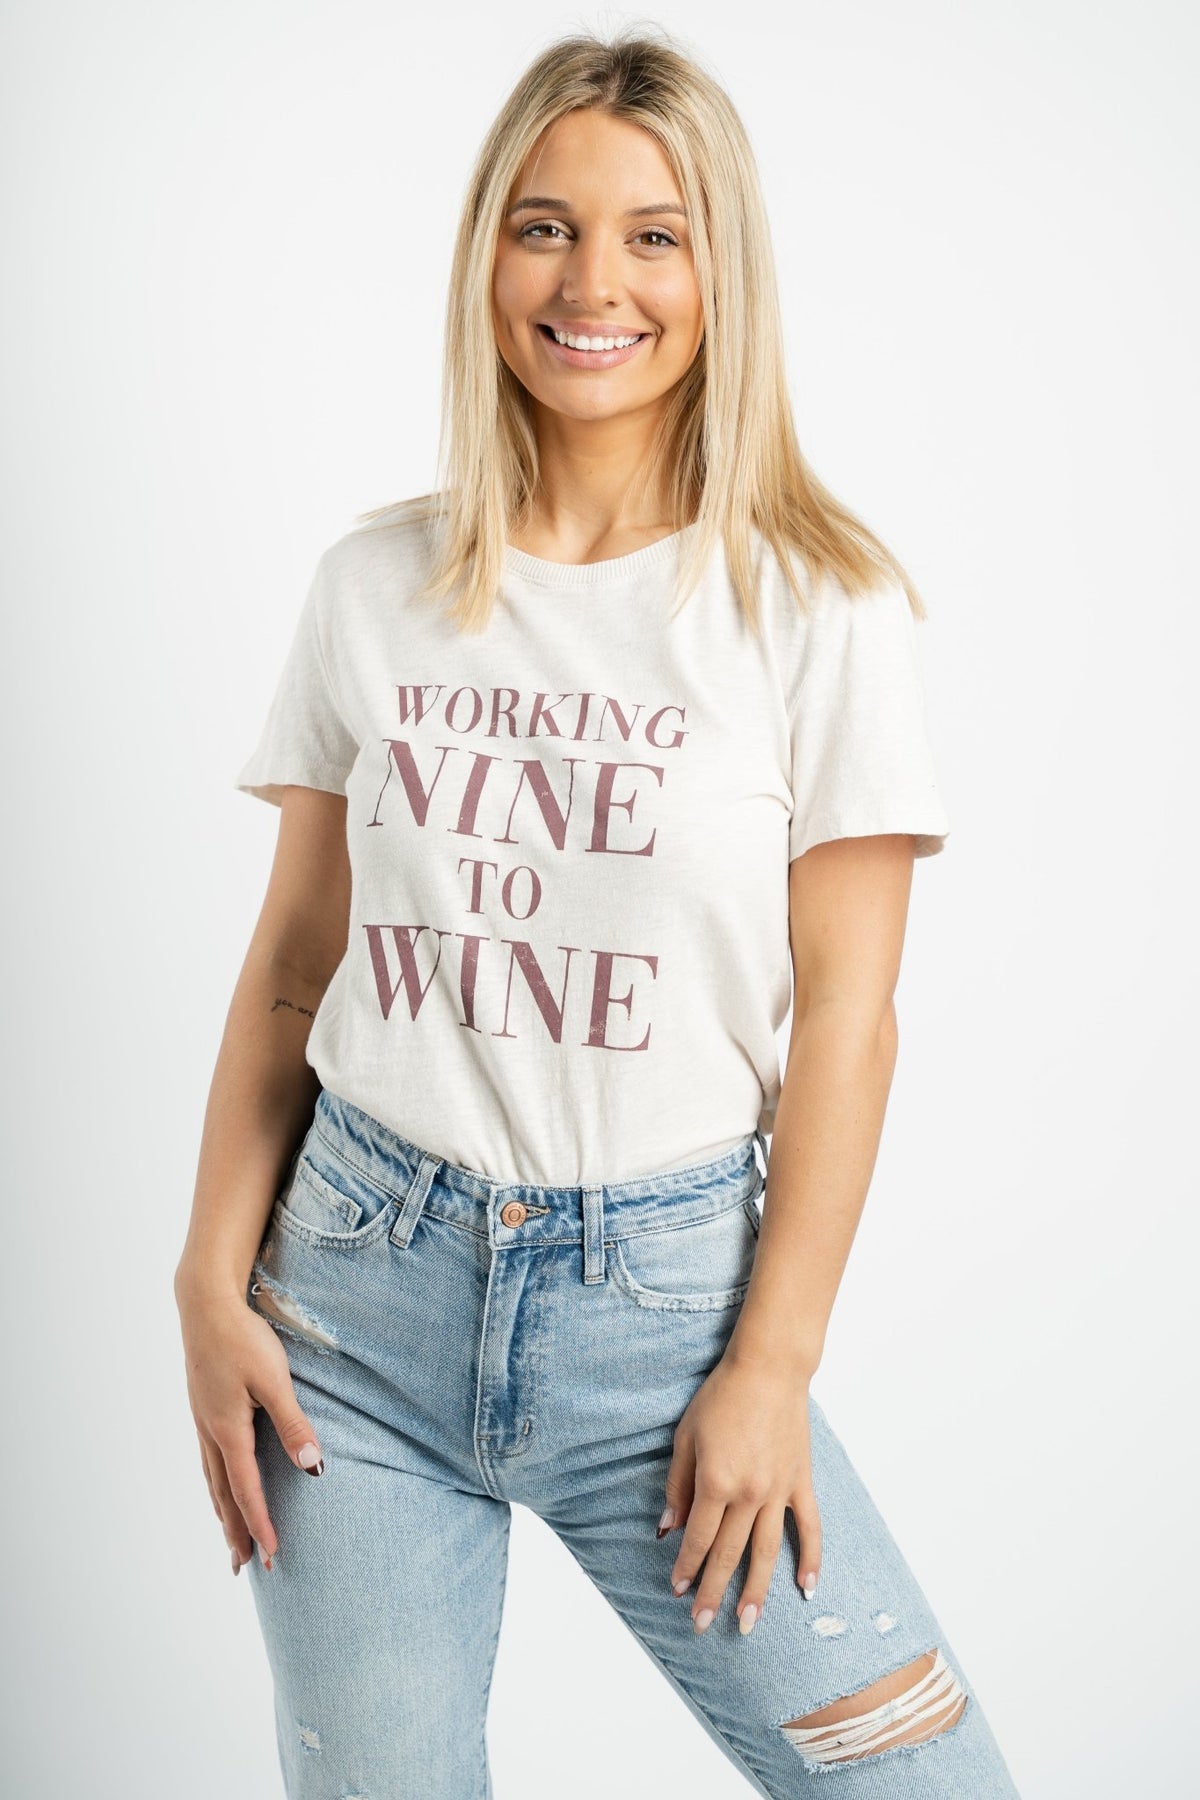 Z Supply easy wine tee sandstone - Z Supply Clothing - Z Supply Tops, Dresses, Tanks, Tees, Cardigans, Joggers and Loungewear at Lush Fashion Lounge